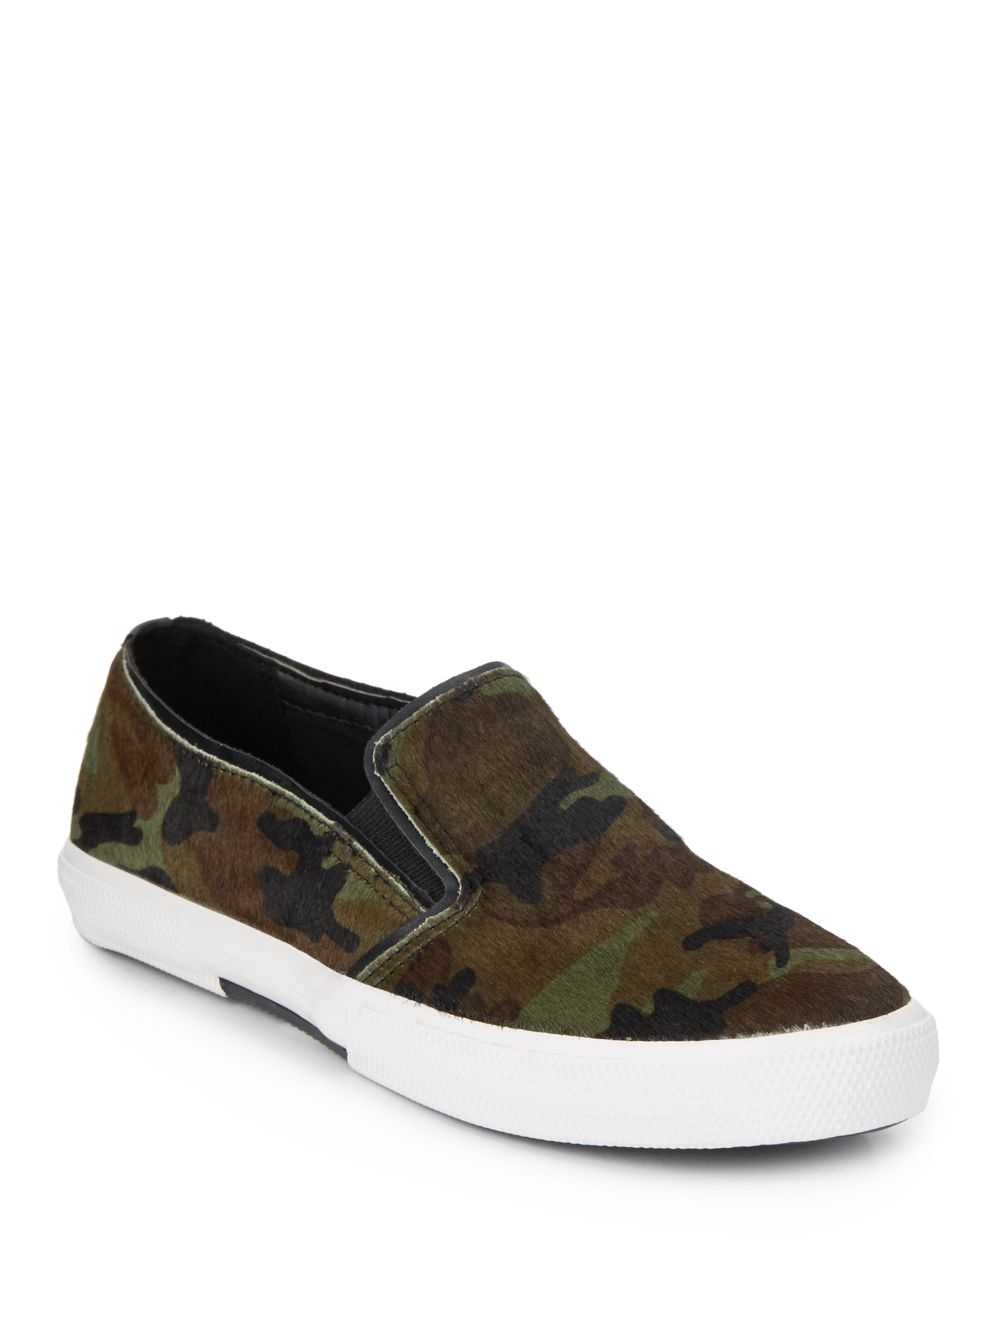 Kenneth Cole Reaction Camo-print Calf Hair Slip-on Sneakers in Green - Lyst